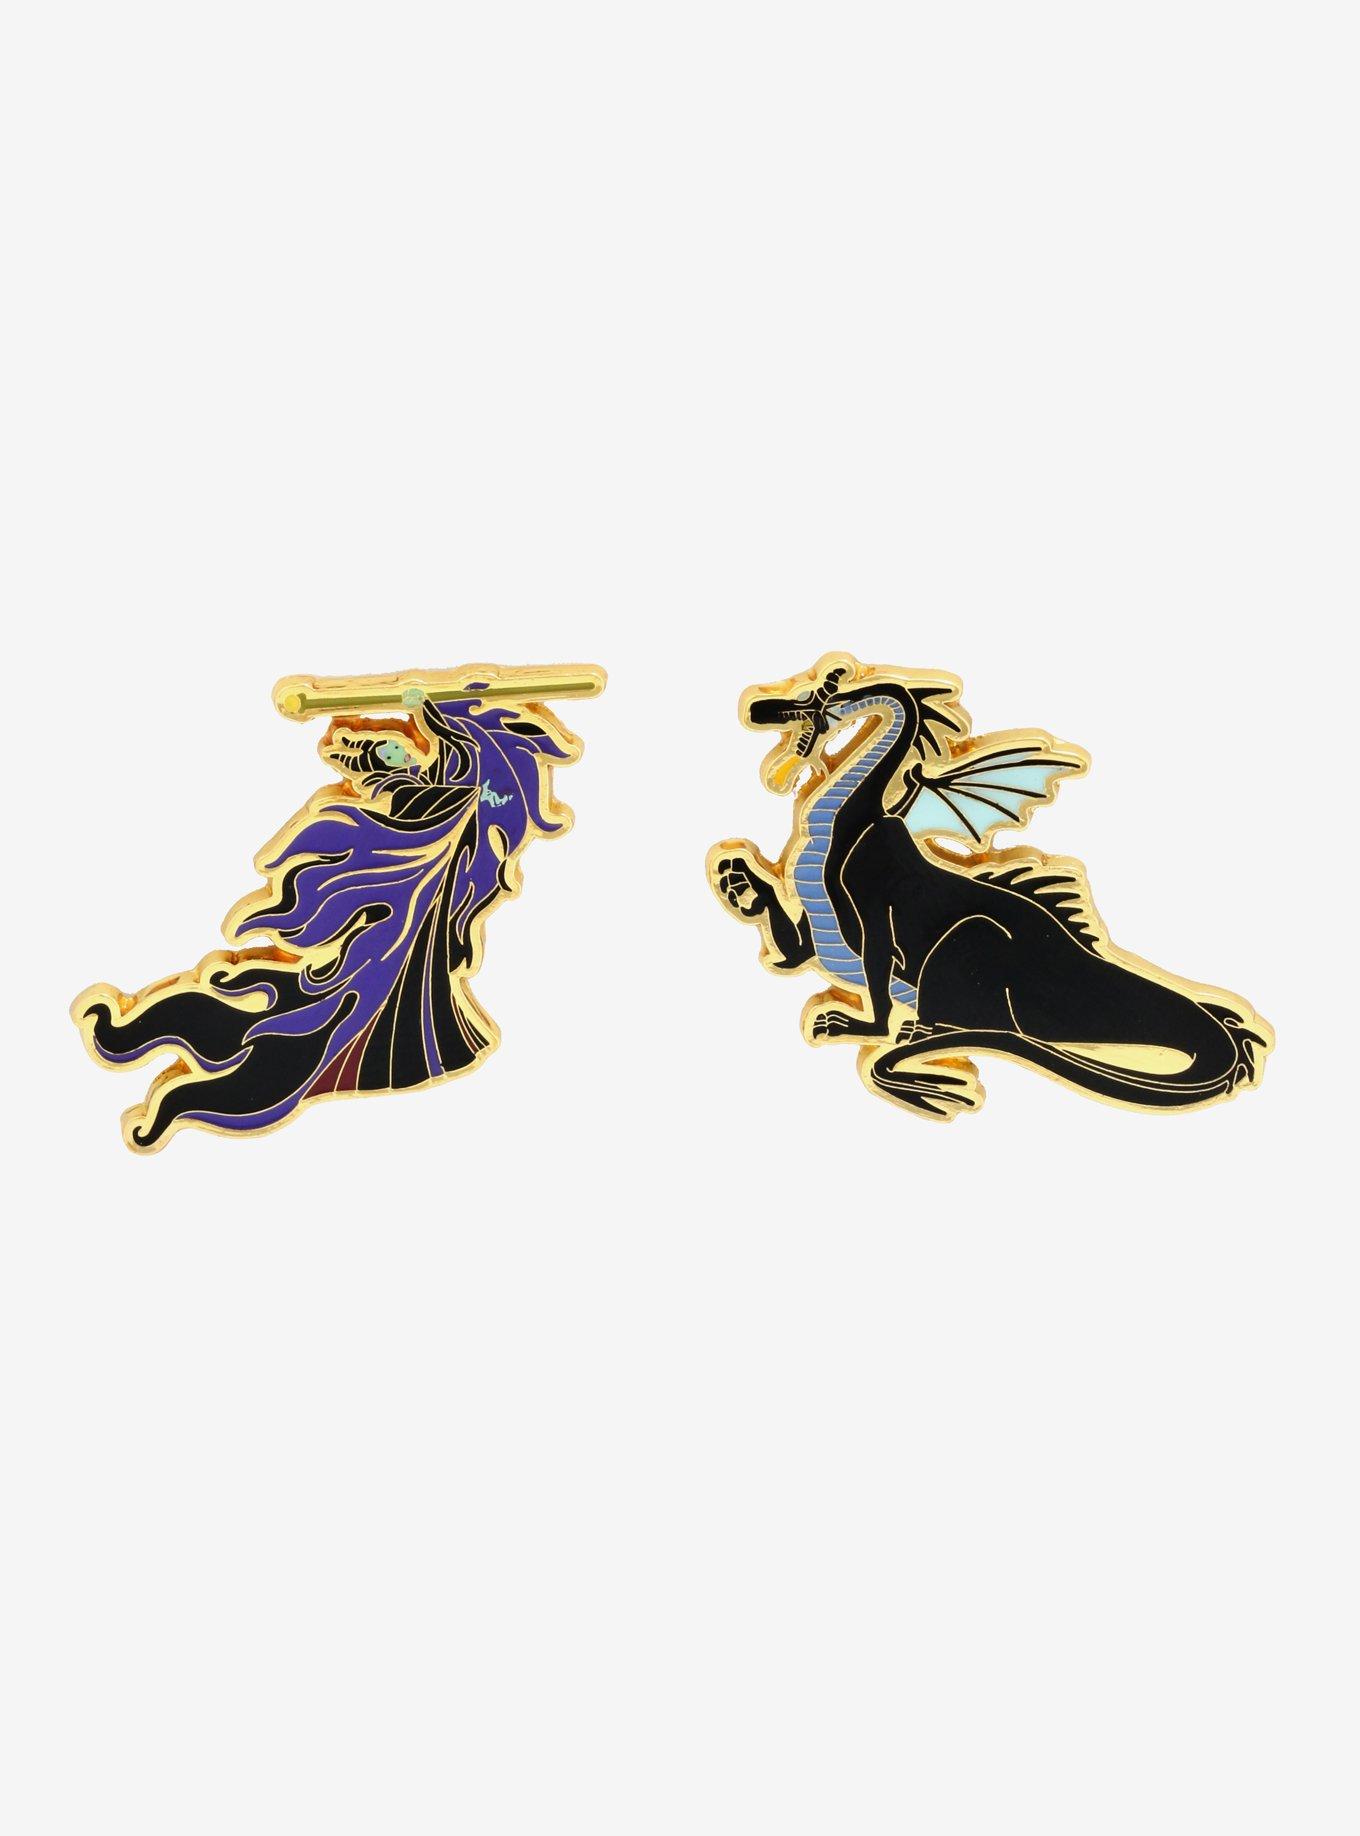 View Pin: Loungefly - Maleficent and Dragon Set - Dragon Only